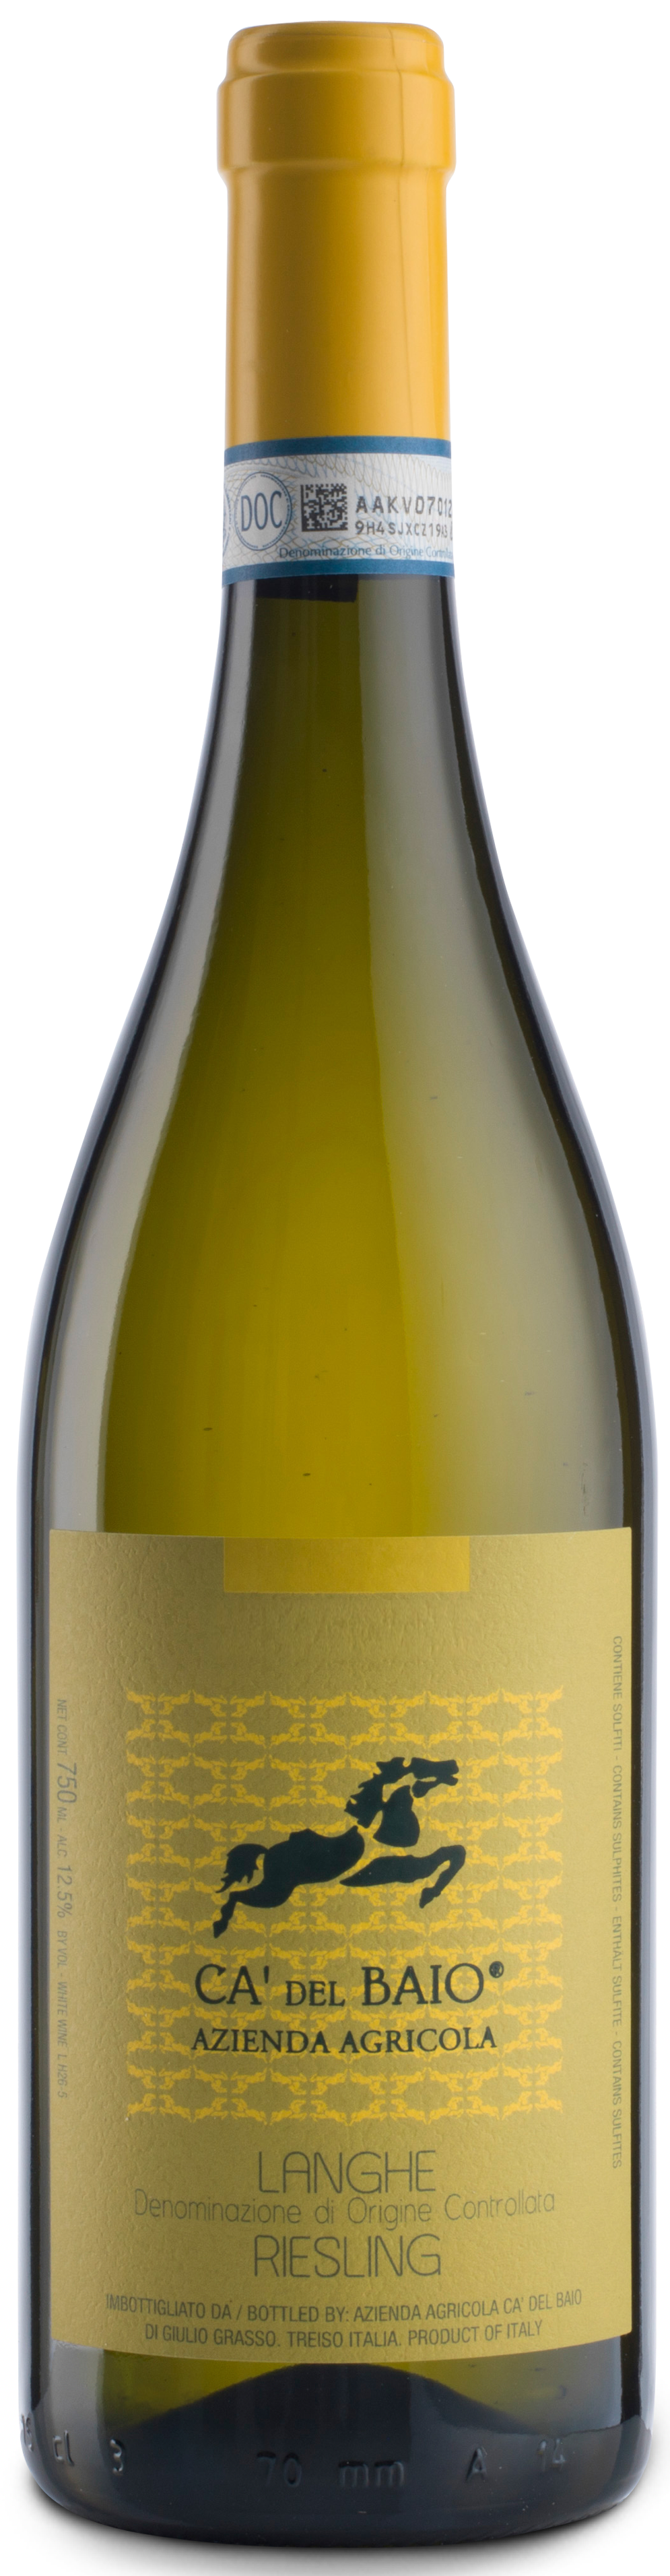 Ca' Del Baio, Langhe Riesling, 2016